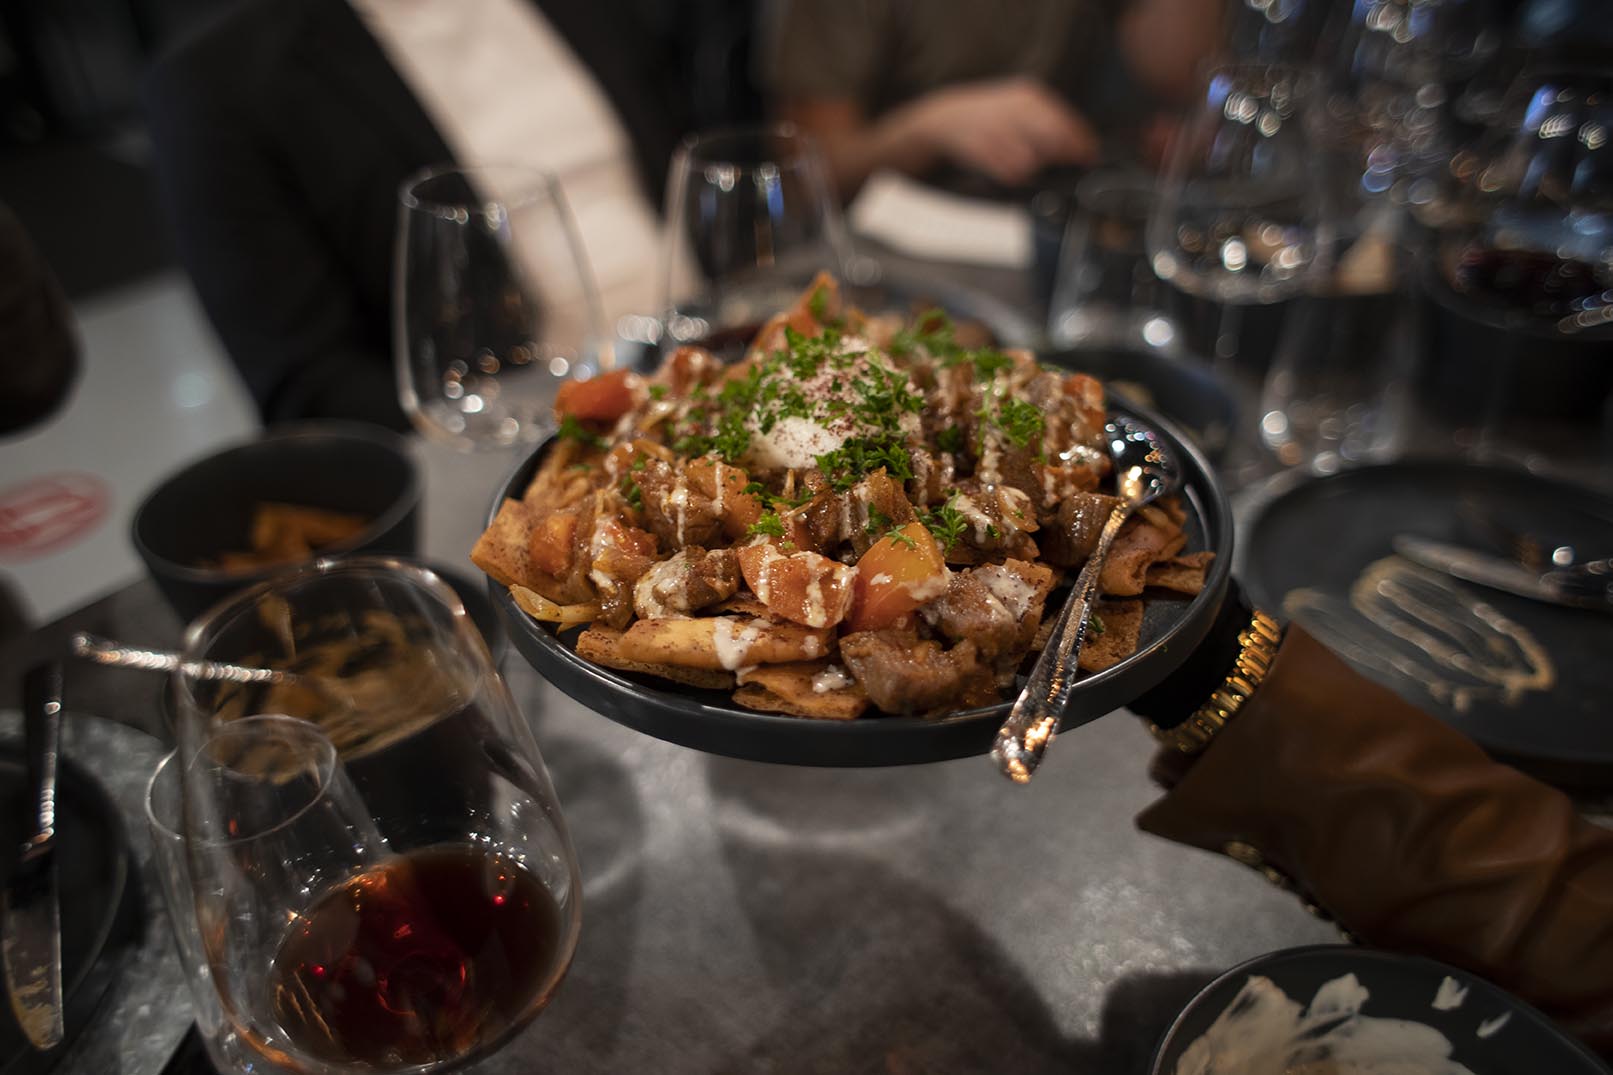 In the Hummus Labs restaurant the A5 Wagyu Shawarma Nachos course is held over the table by a guest. The Shawama Nachos are served over Pita chips on a dark grey cermaic plate and topped with fresh parsley. Wine glasses and guests are blurred in the background.